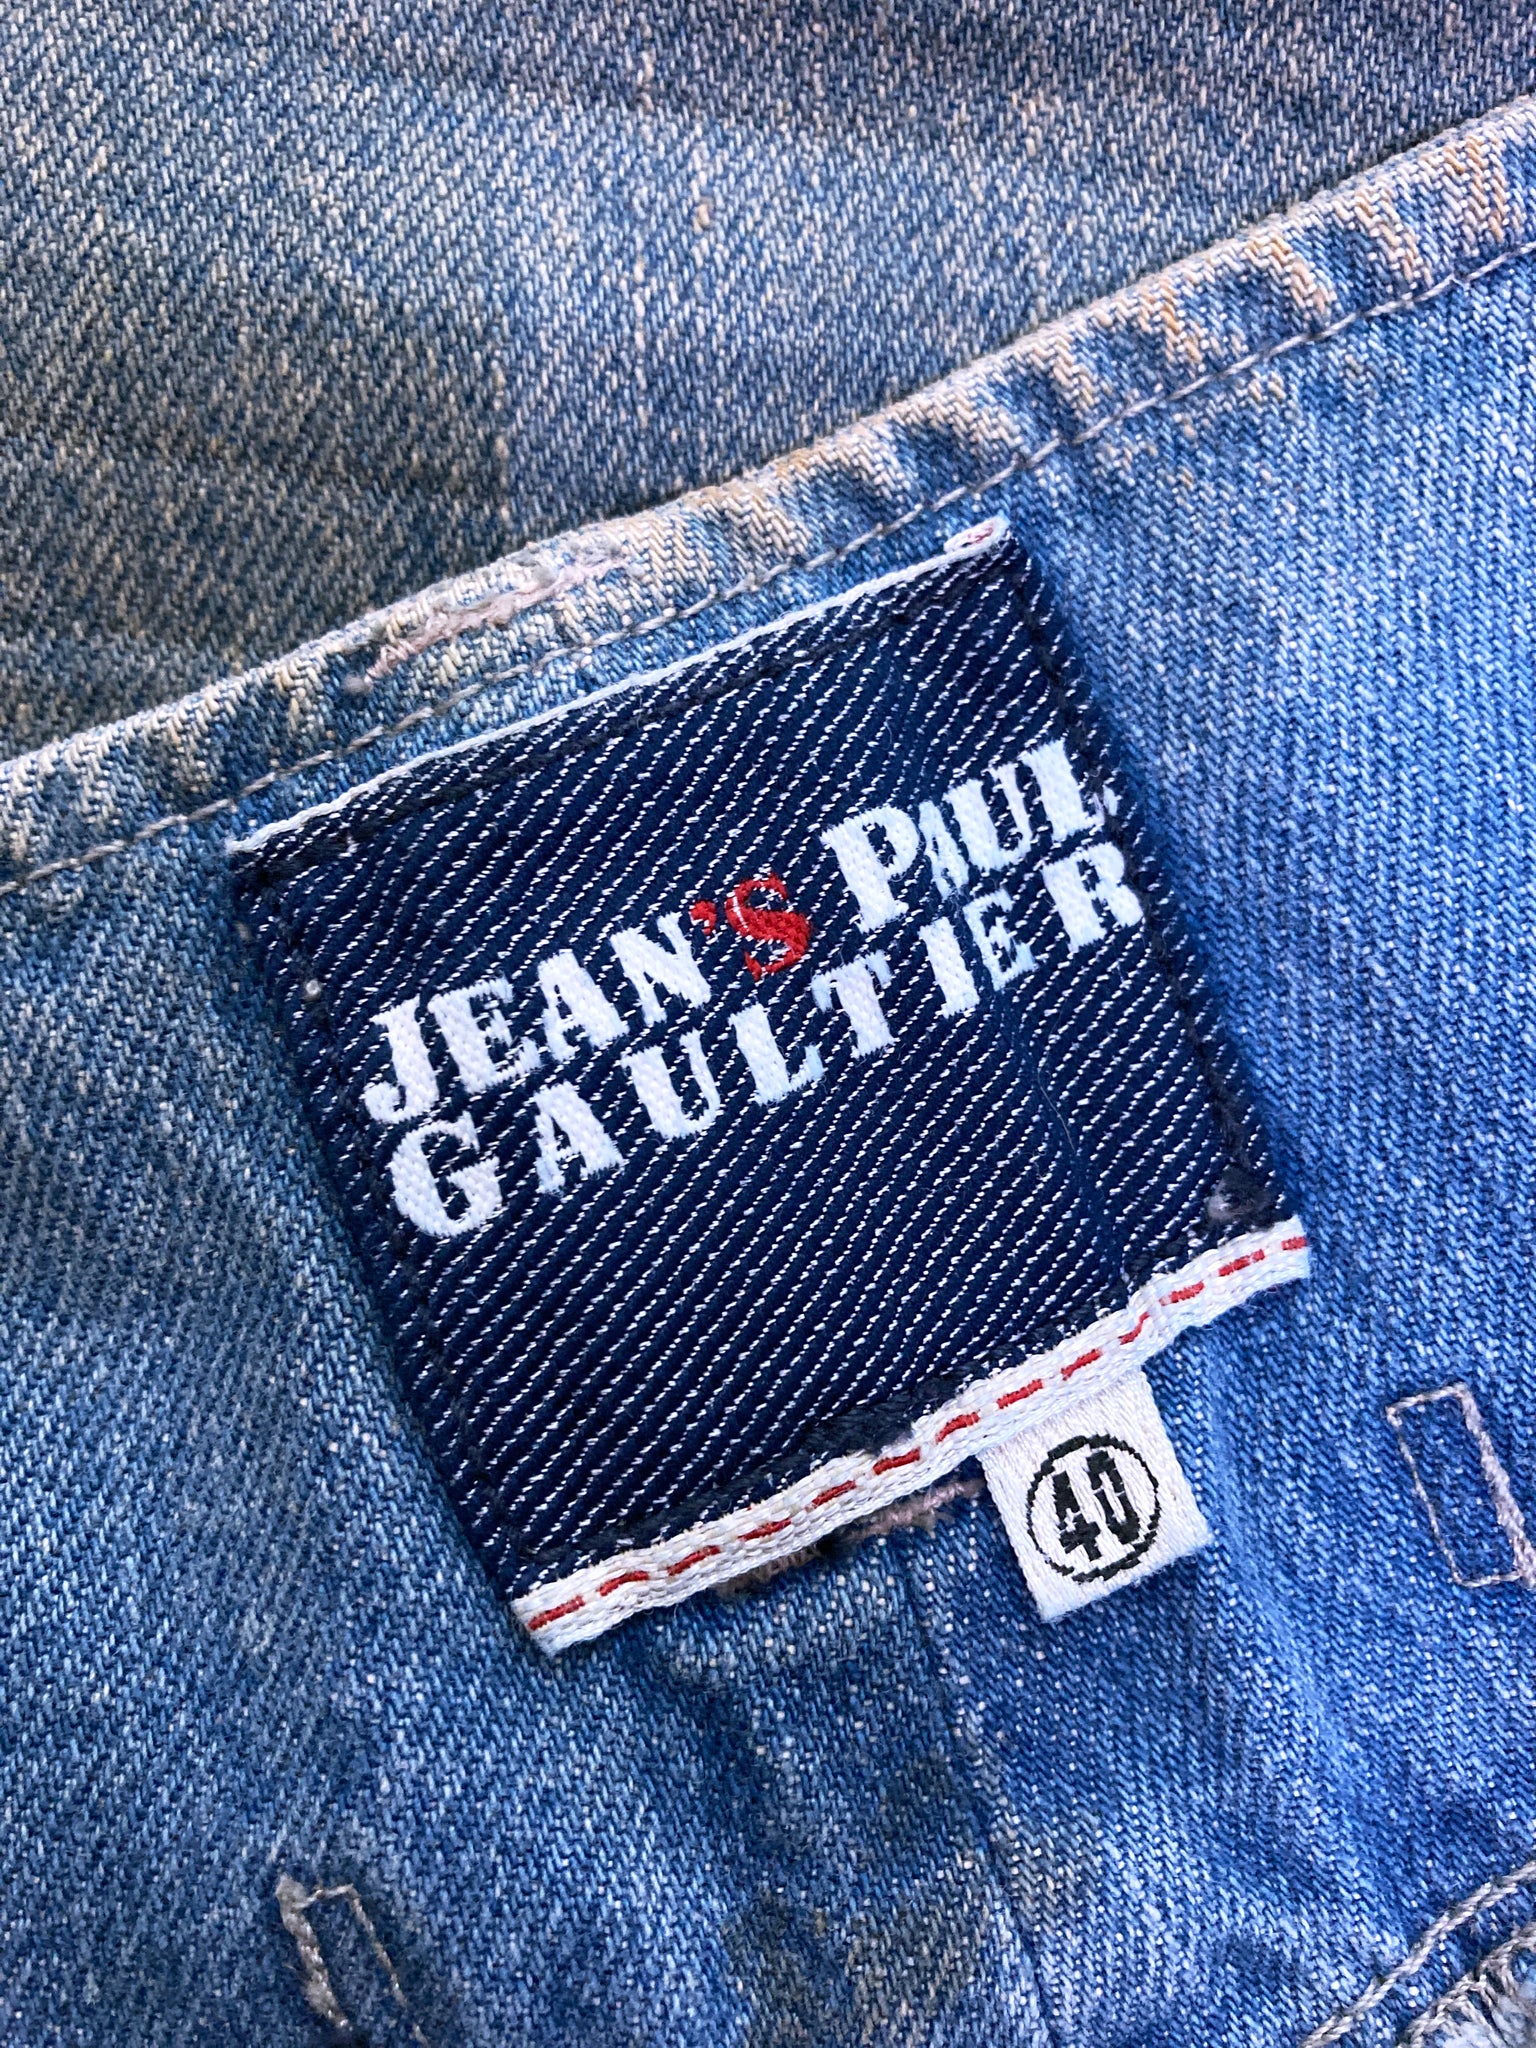 Jean’s Paul Gaultier 2000s wide leg jeans with washed dirty treatment - sz 40